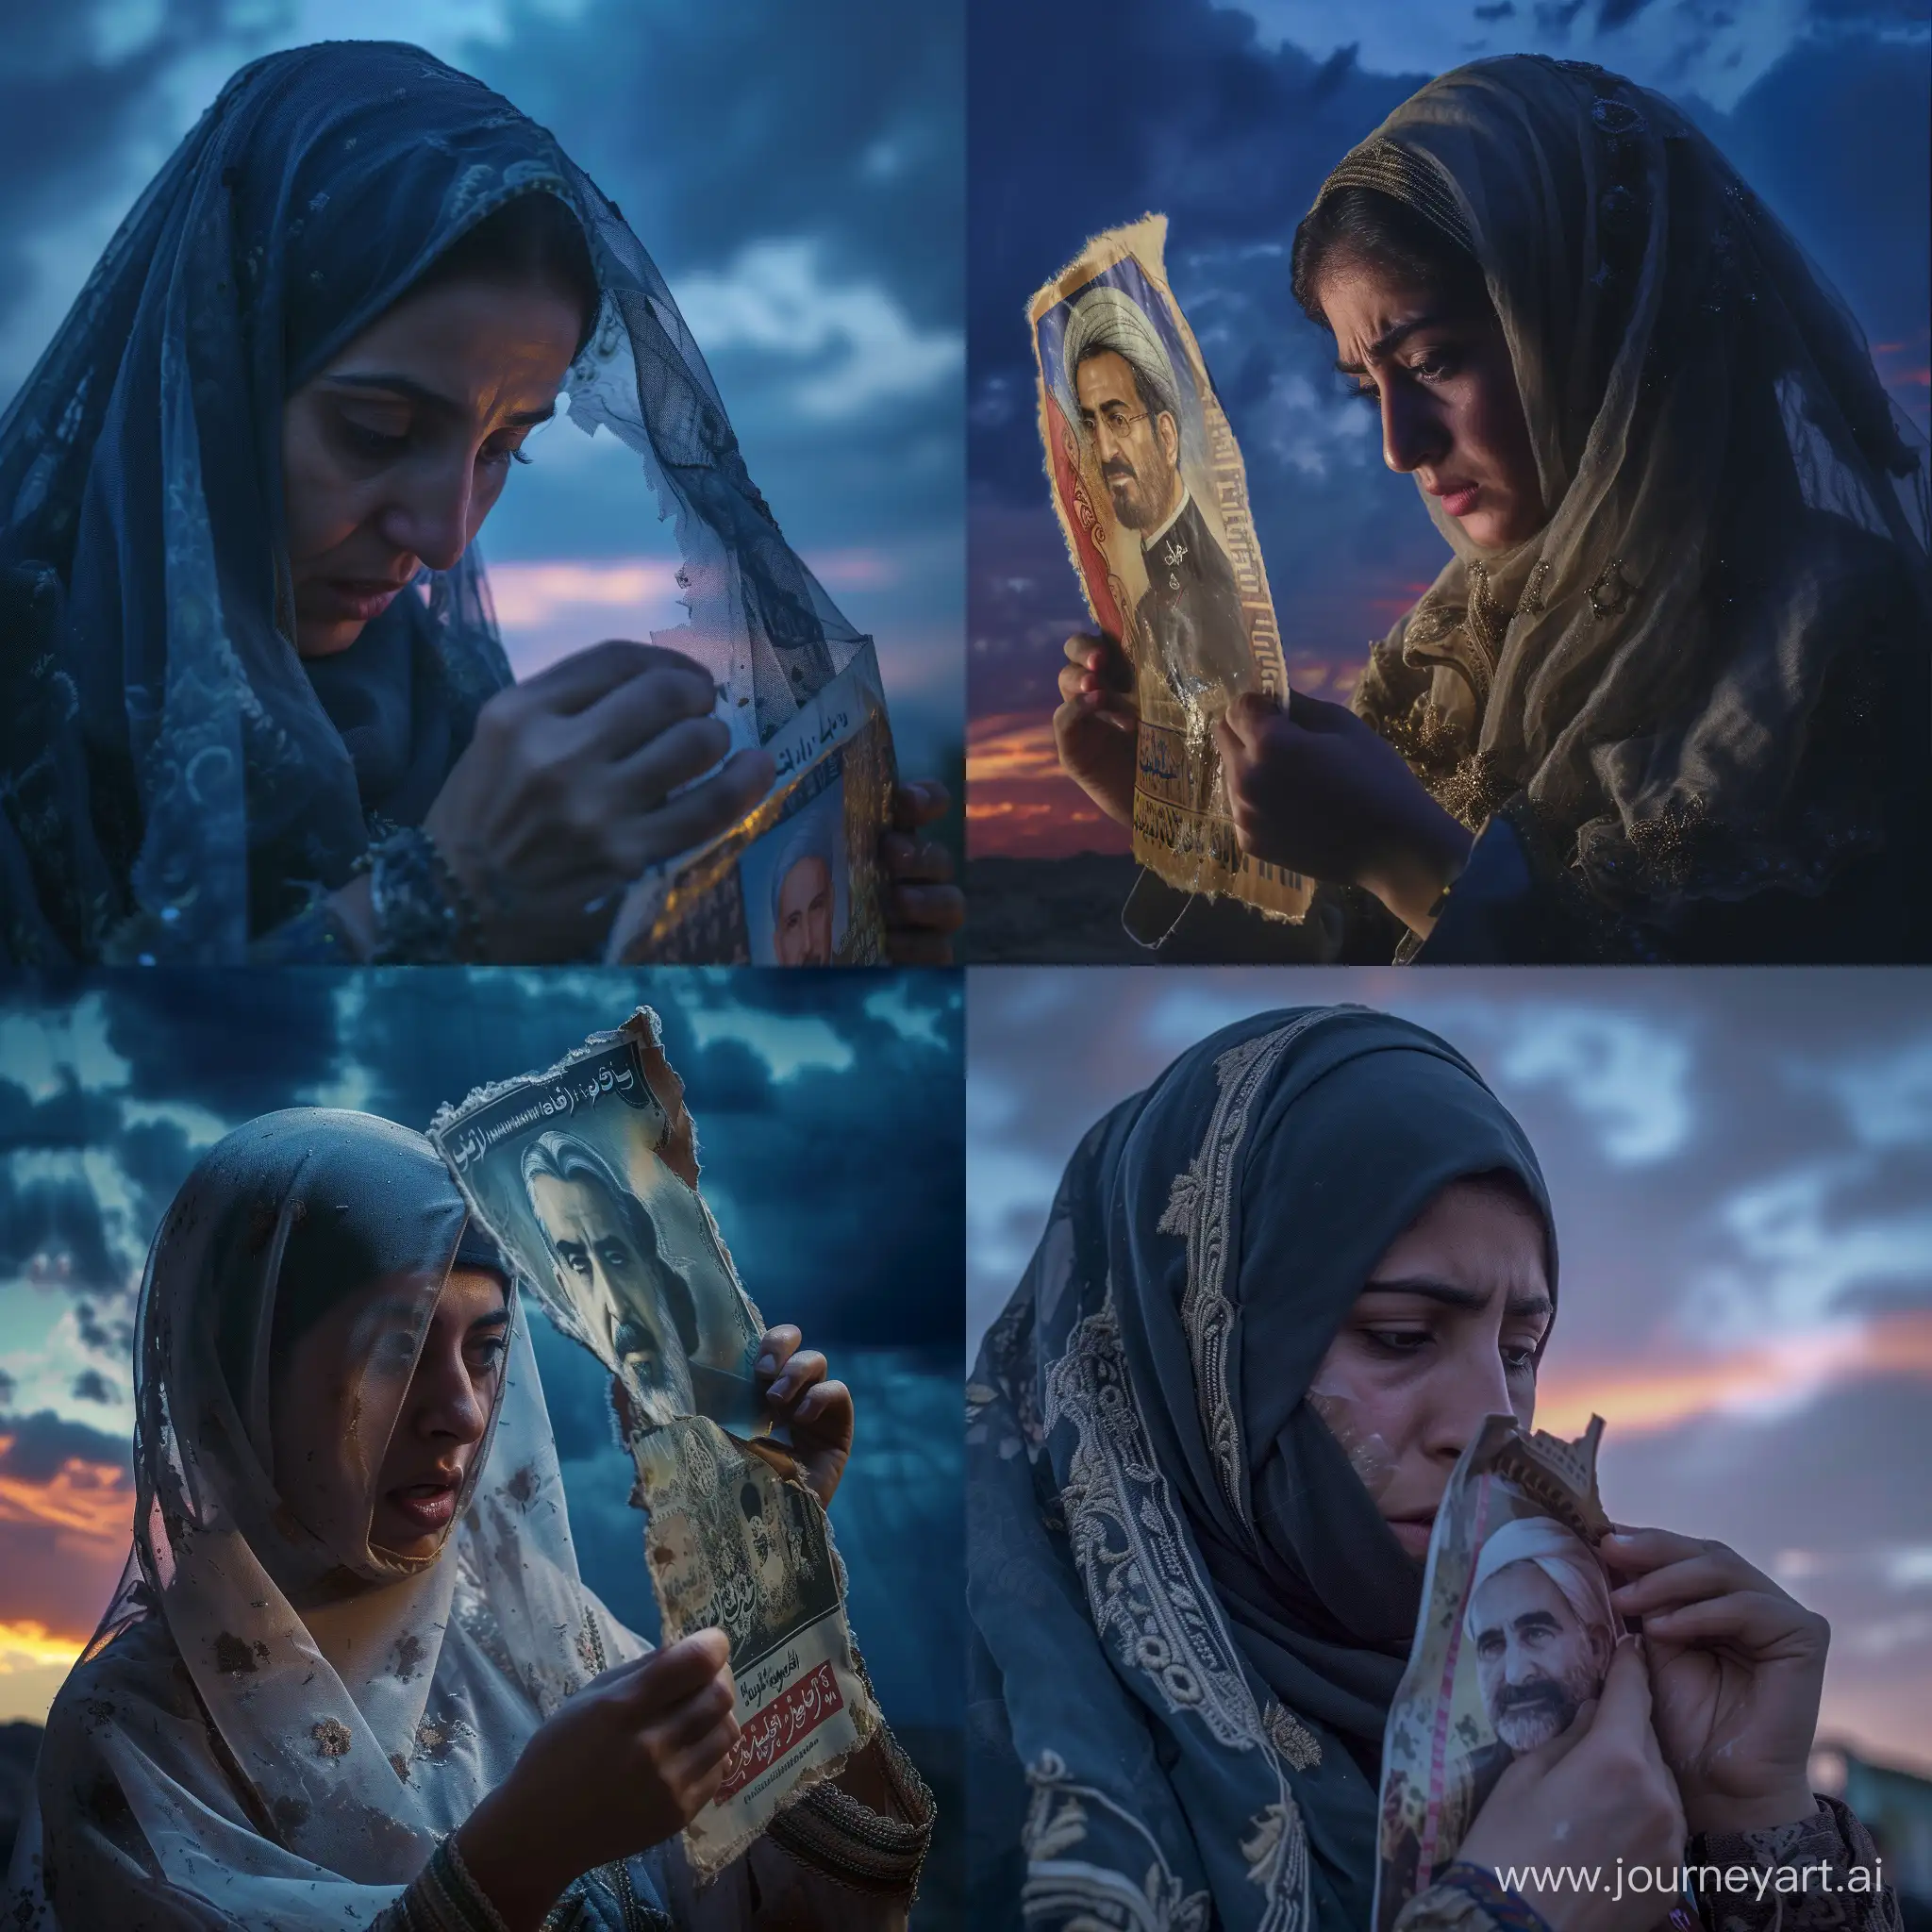 Veiled-Woman-Tears-Poster-of-Shah-of-Pahlavi-at-Dusk